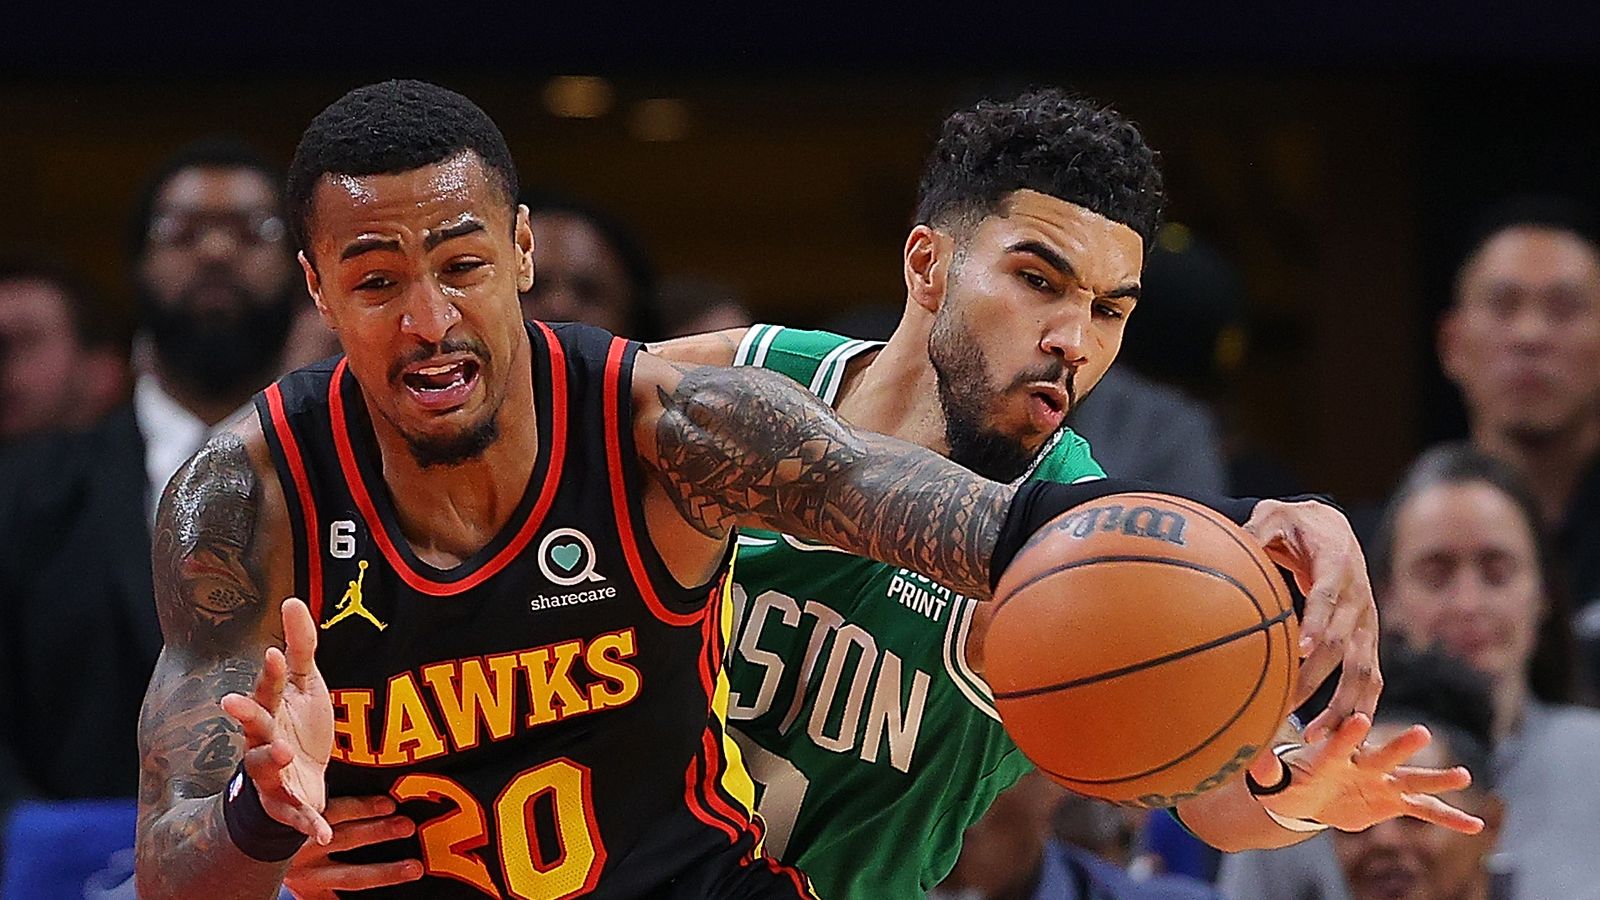 Boston's Jayson Tatum comes in 4th in 1st 2022 fan All-Star voting returns;  Jaylen Brown yet to register in top-10